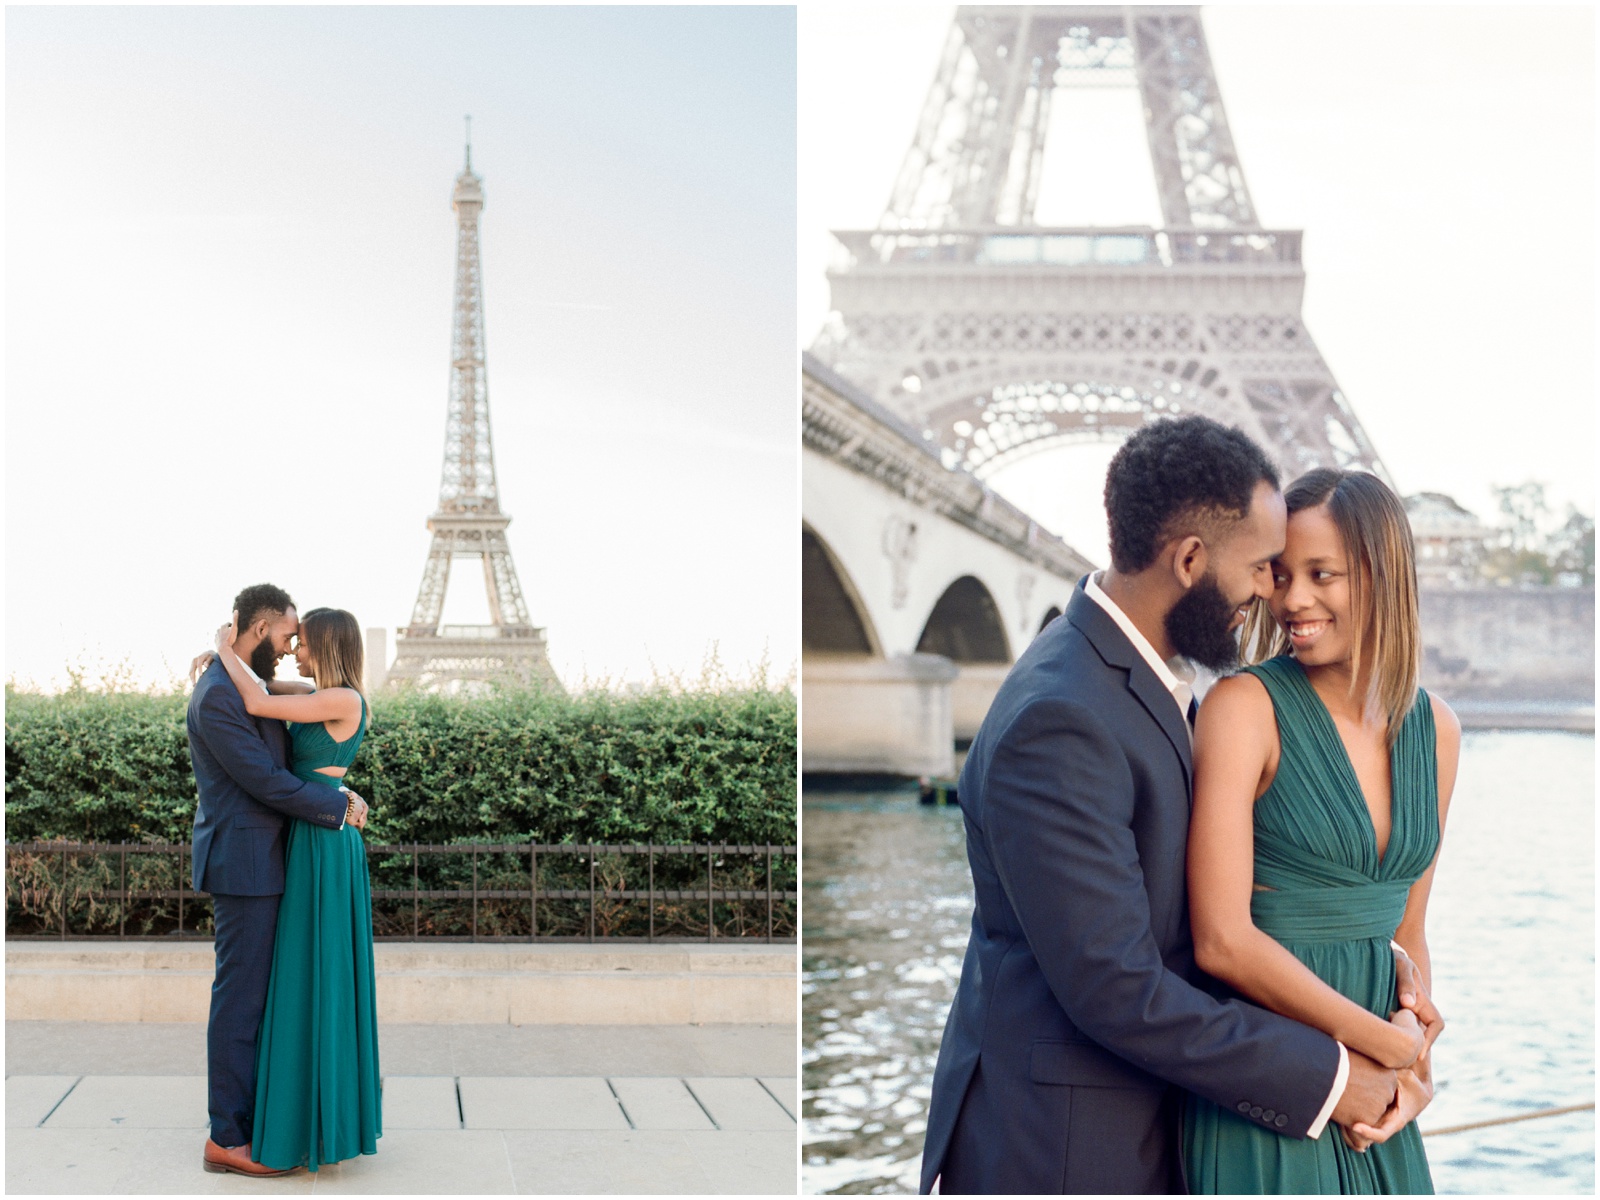 Engagement photography at the Eiffel Tower